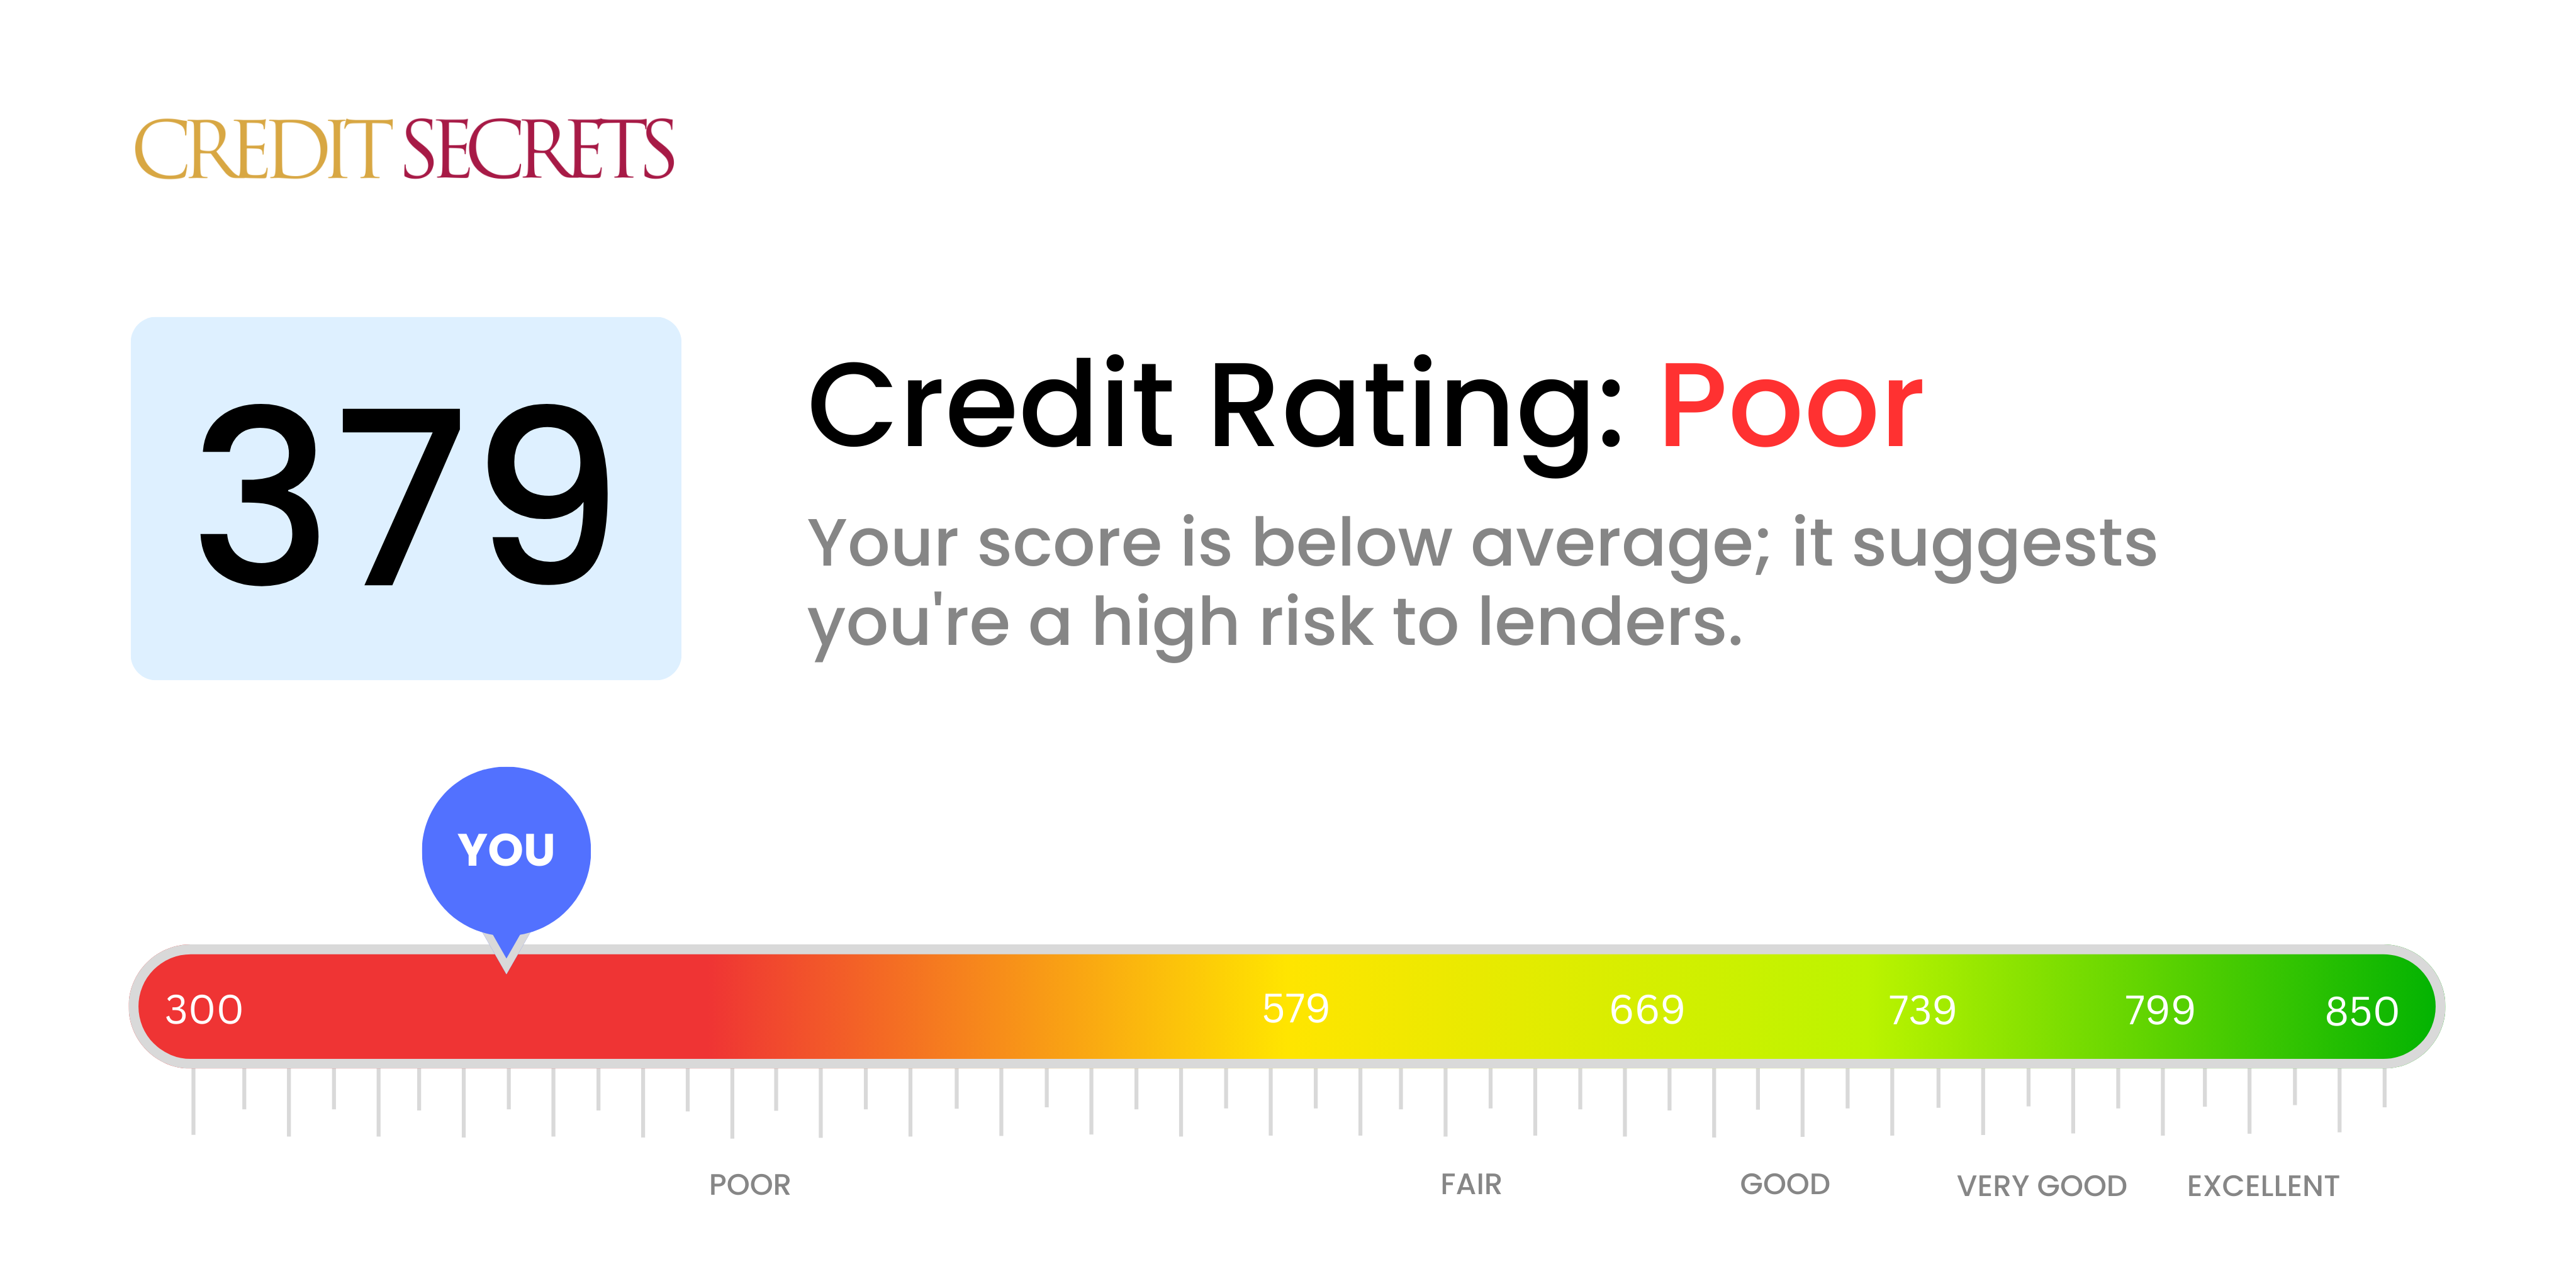 Is 379 a good credit score?